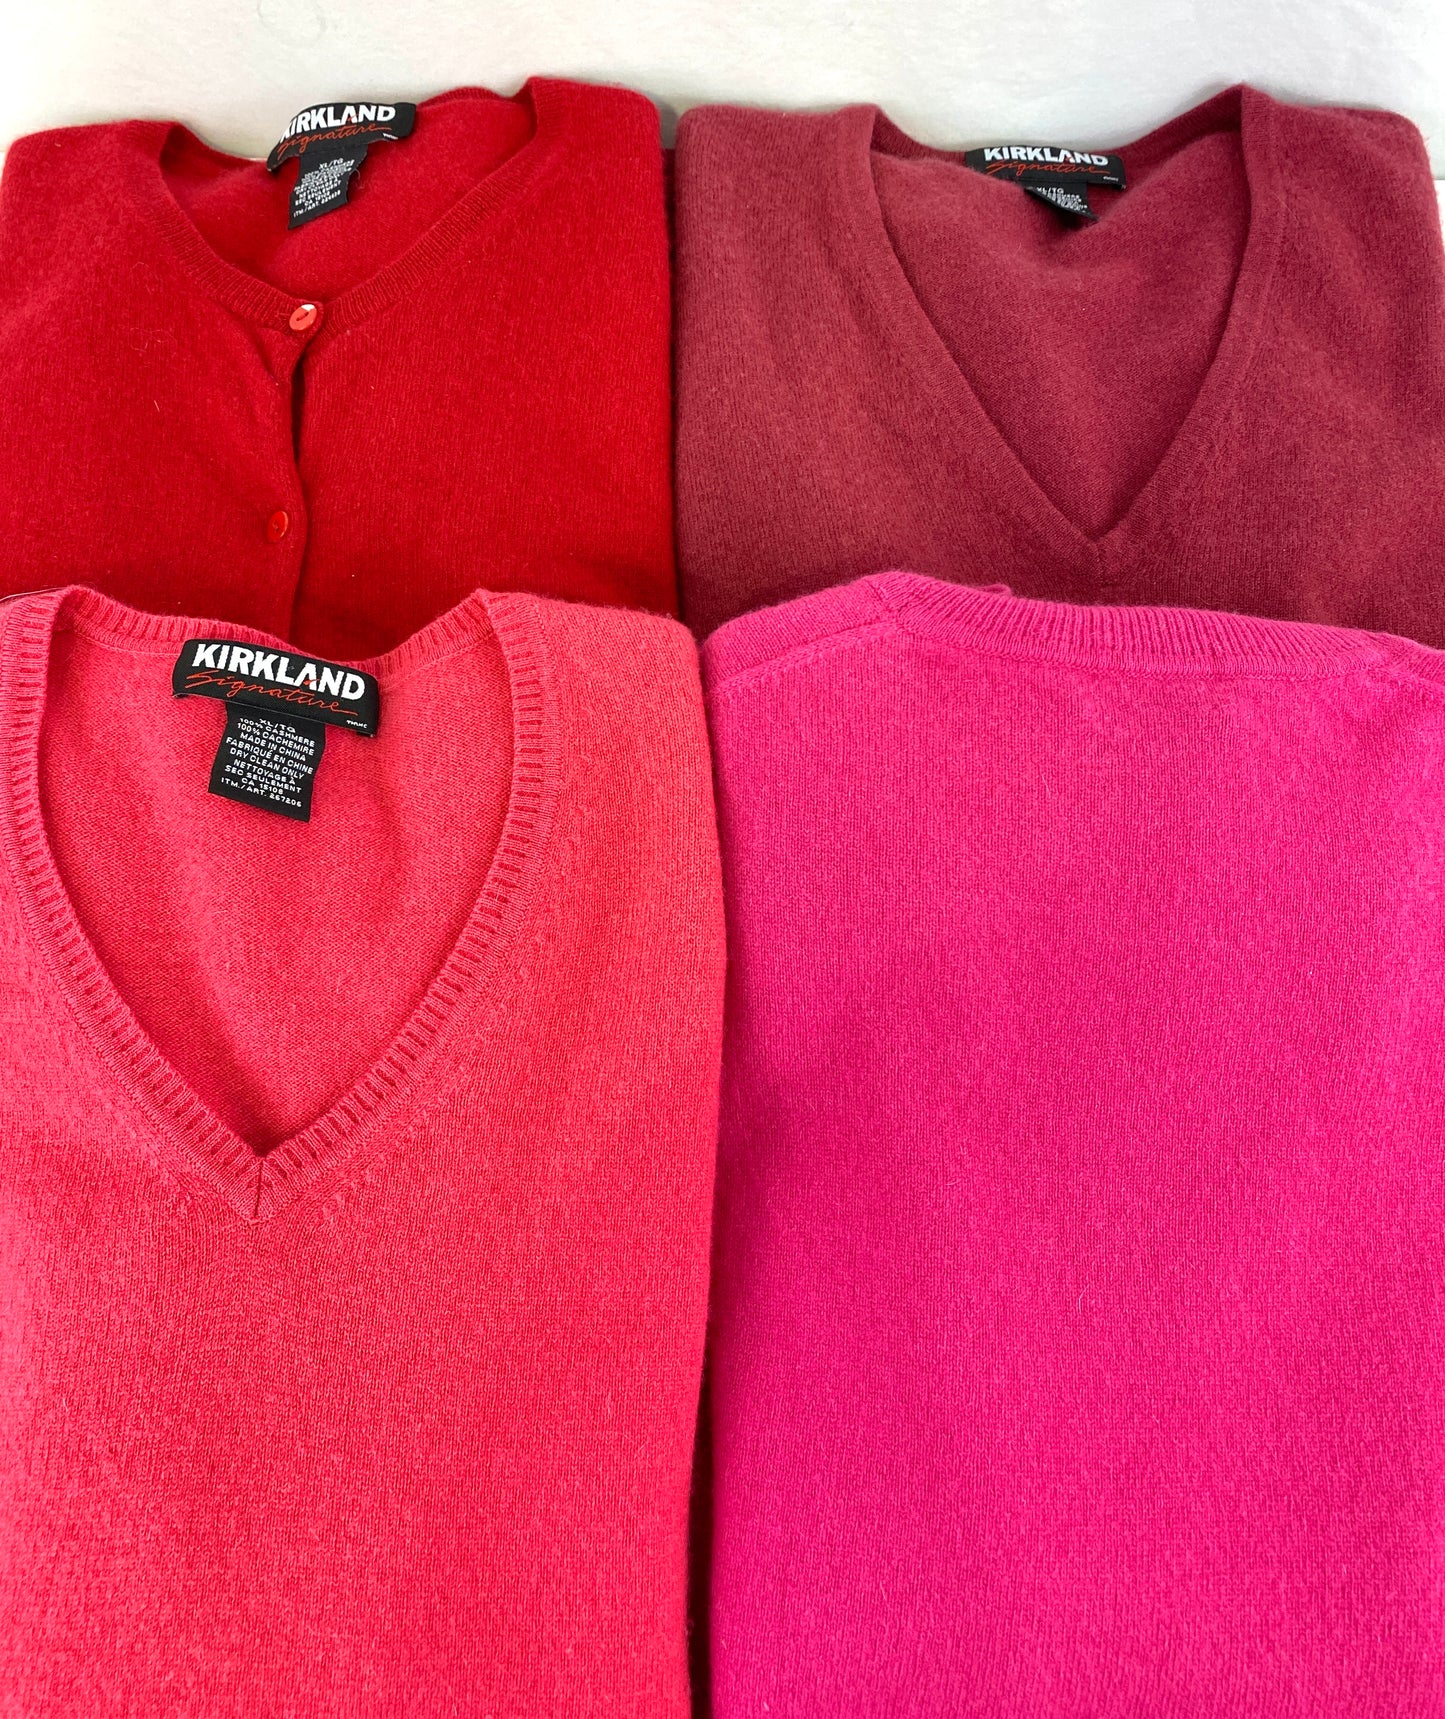 4 vintage cashmere sweaters folded side by side. Ian Drummond Vintage. 